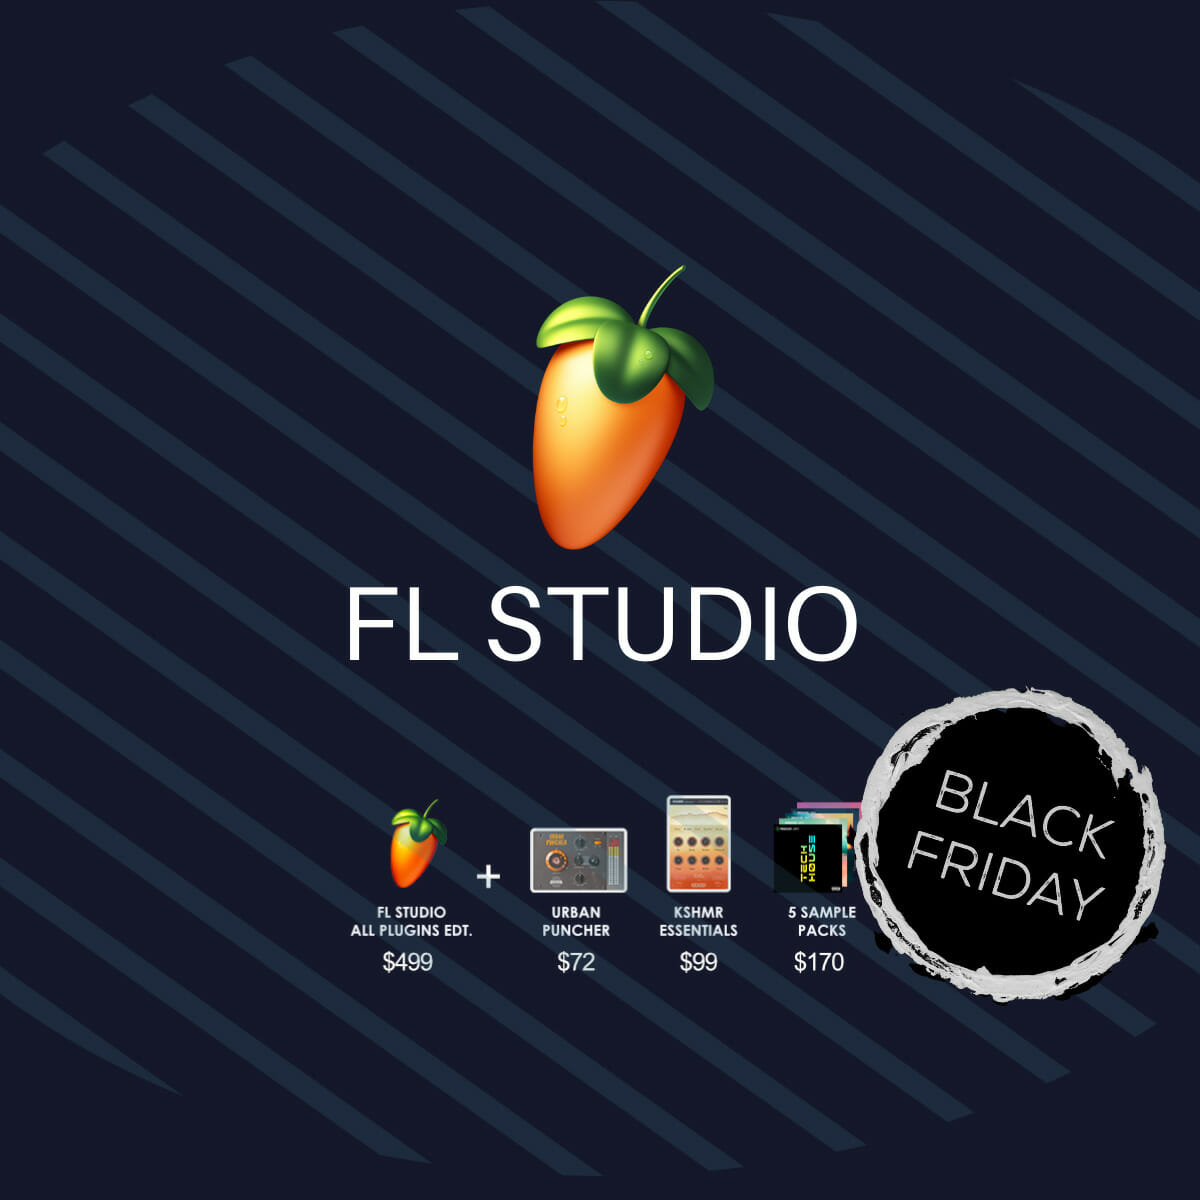 fl studio trial is better than fruity version